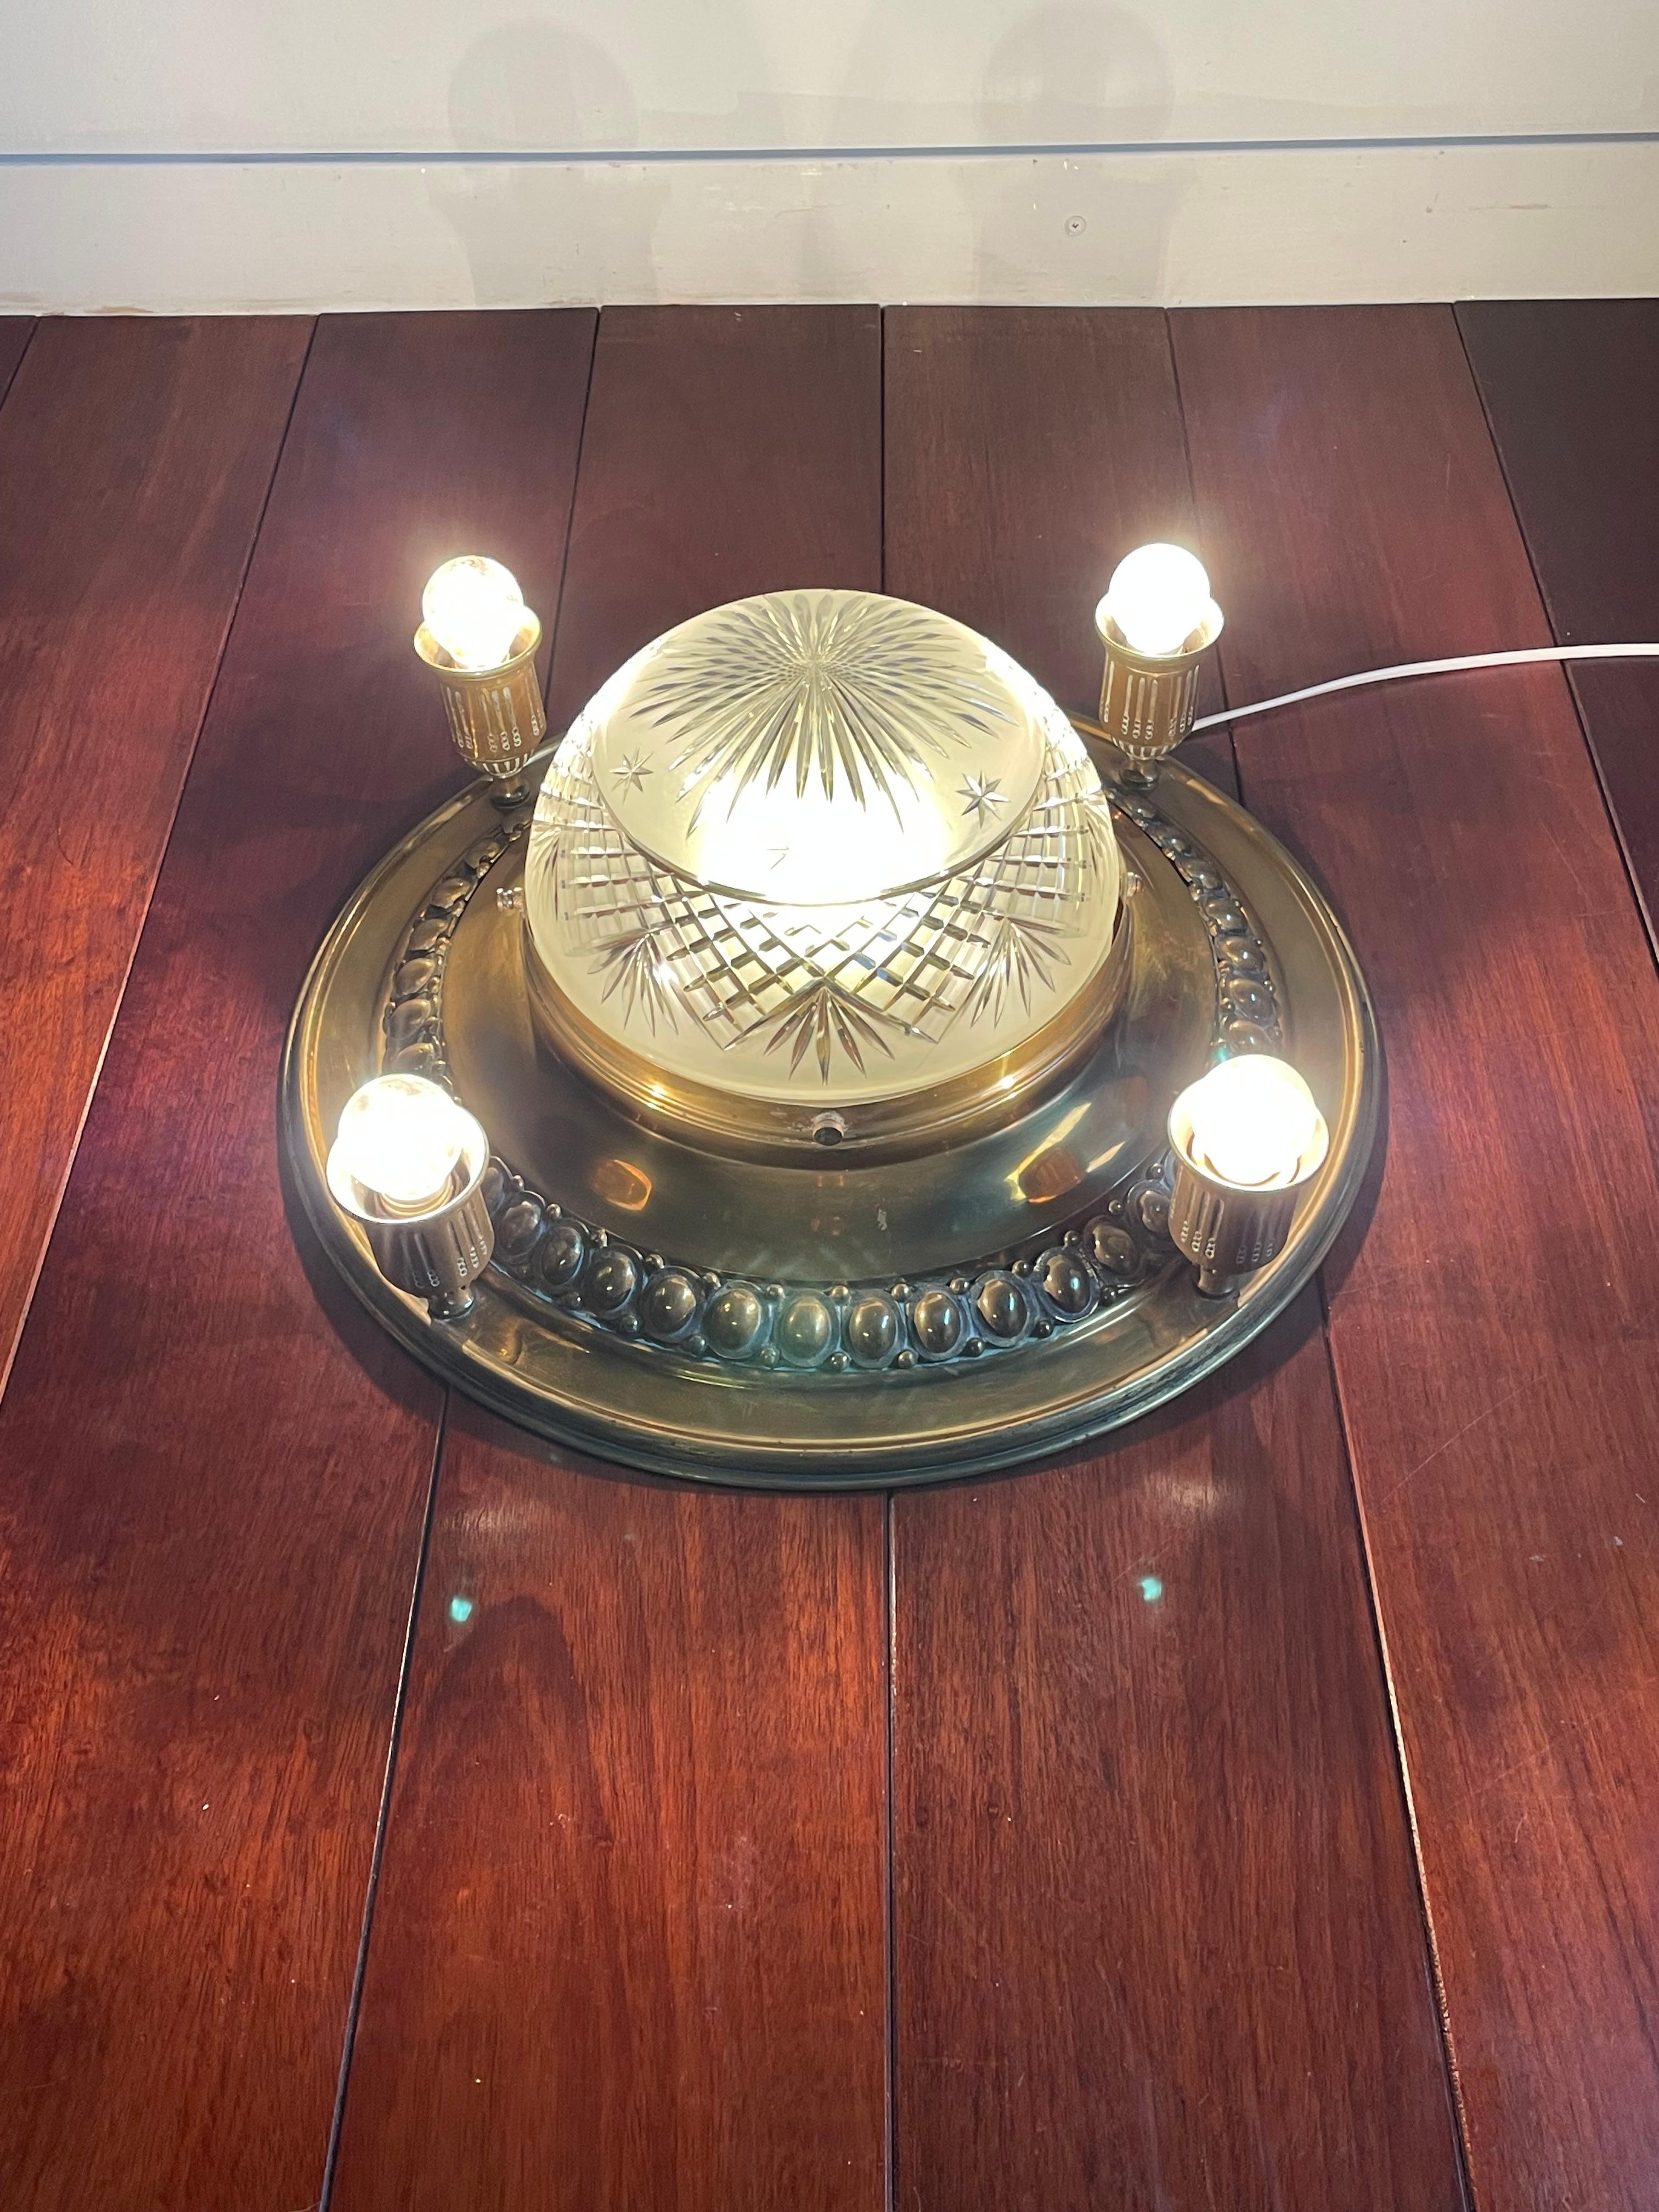 Rare and great looking, early 20th century, large ceiling light.

With early 20th century lighting being one of our specialities, finding this rare and extraordinary flush mount felt like a blessing. It is clear that early 20th century craftsman in